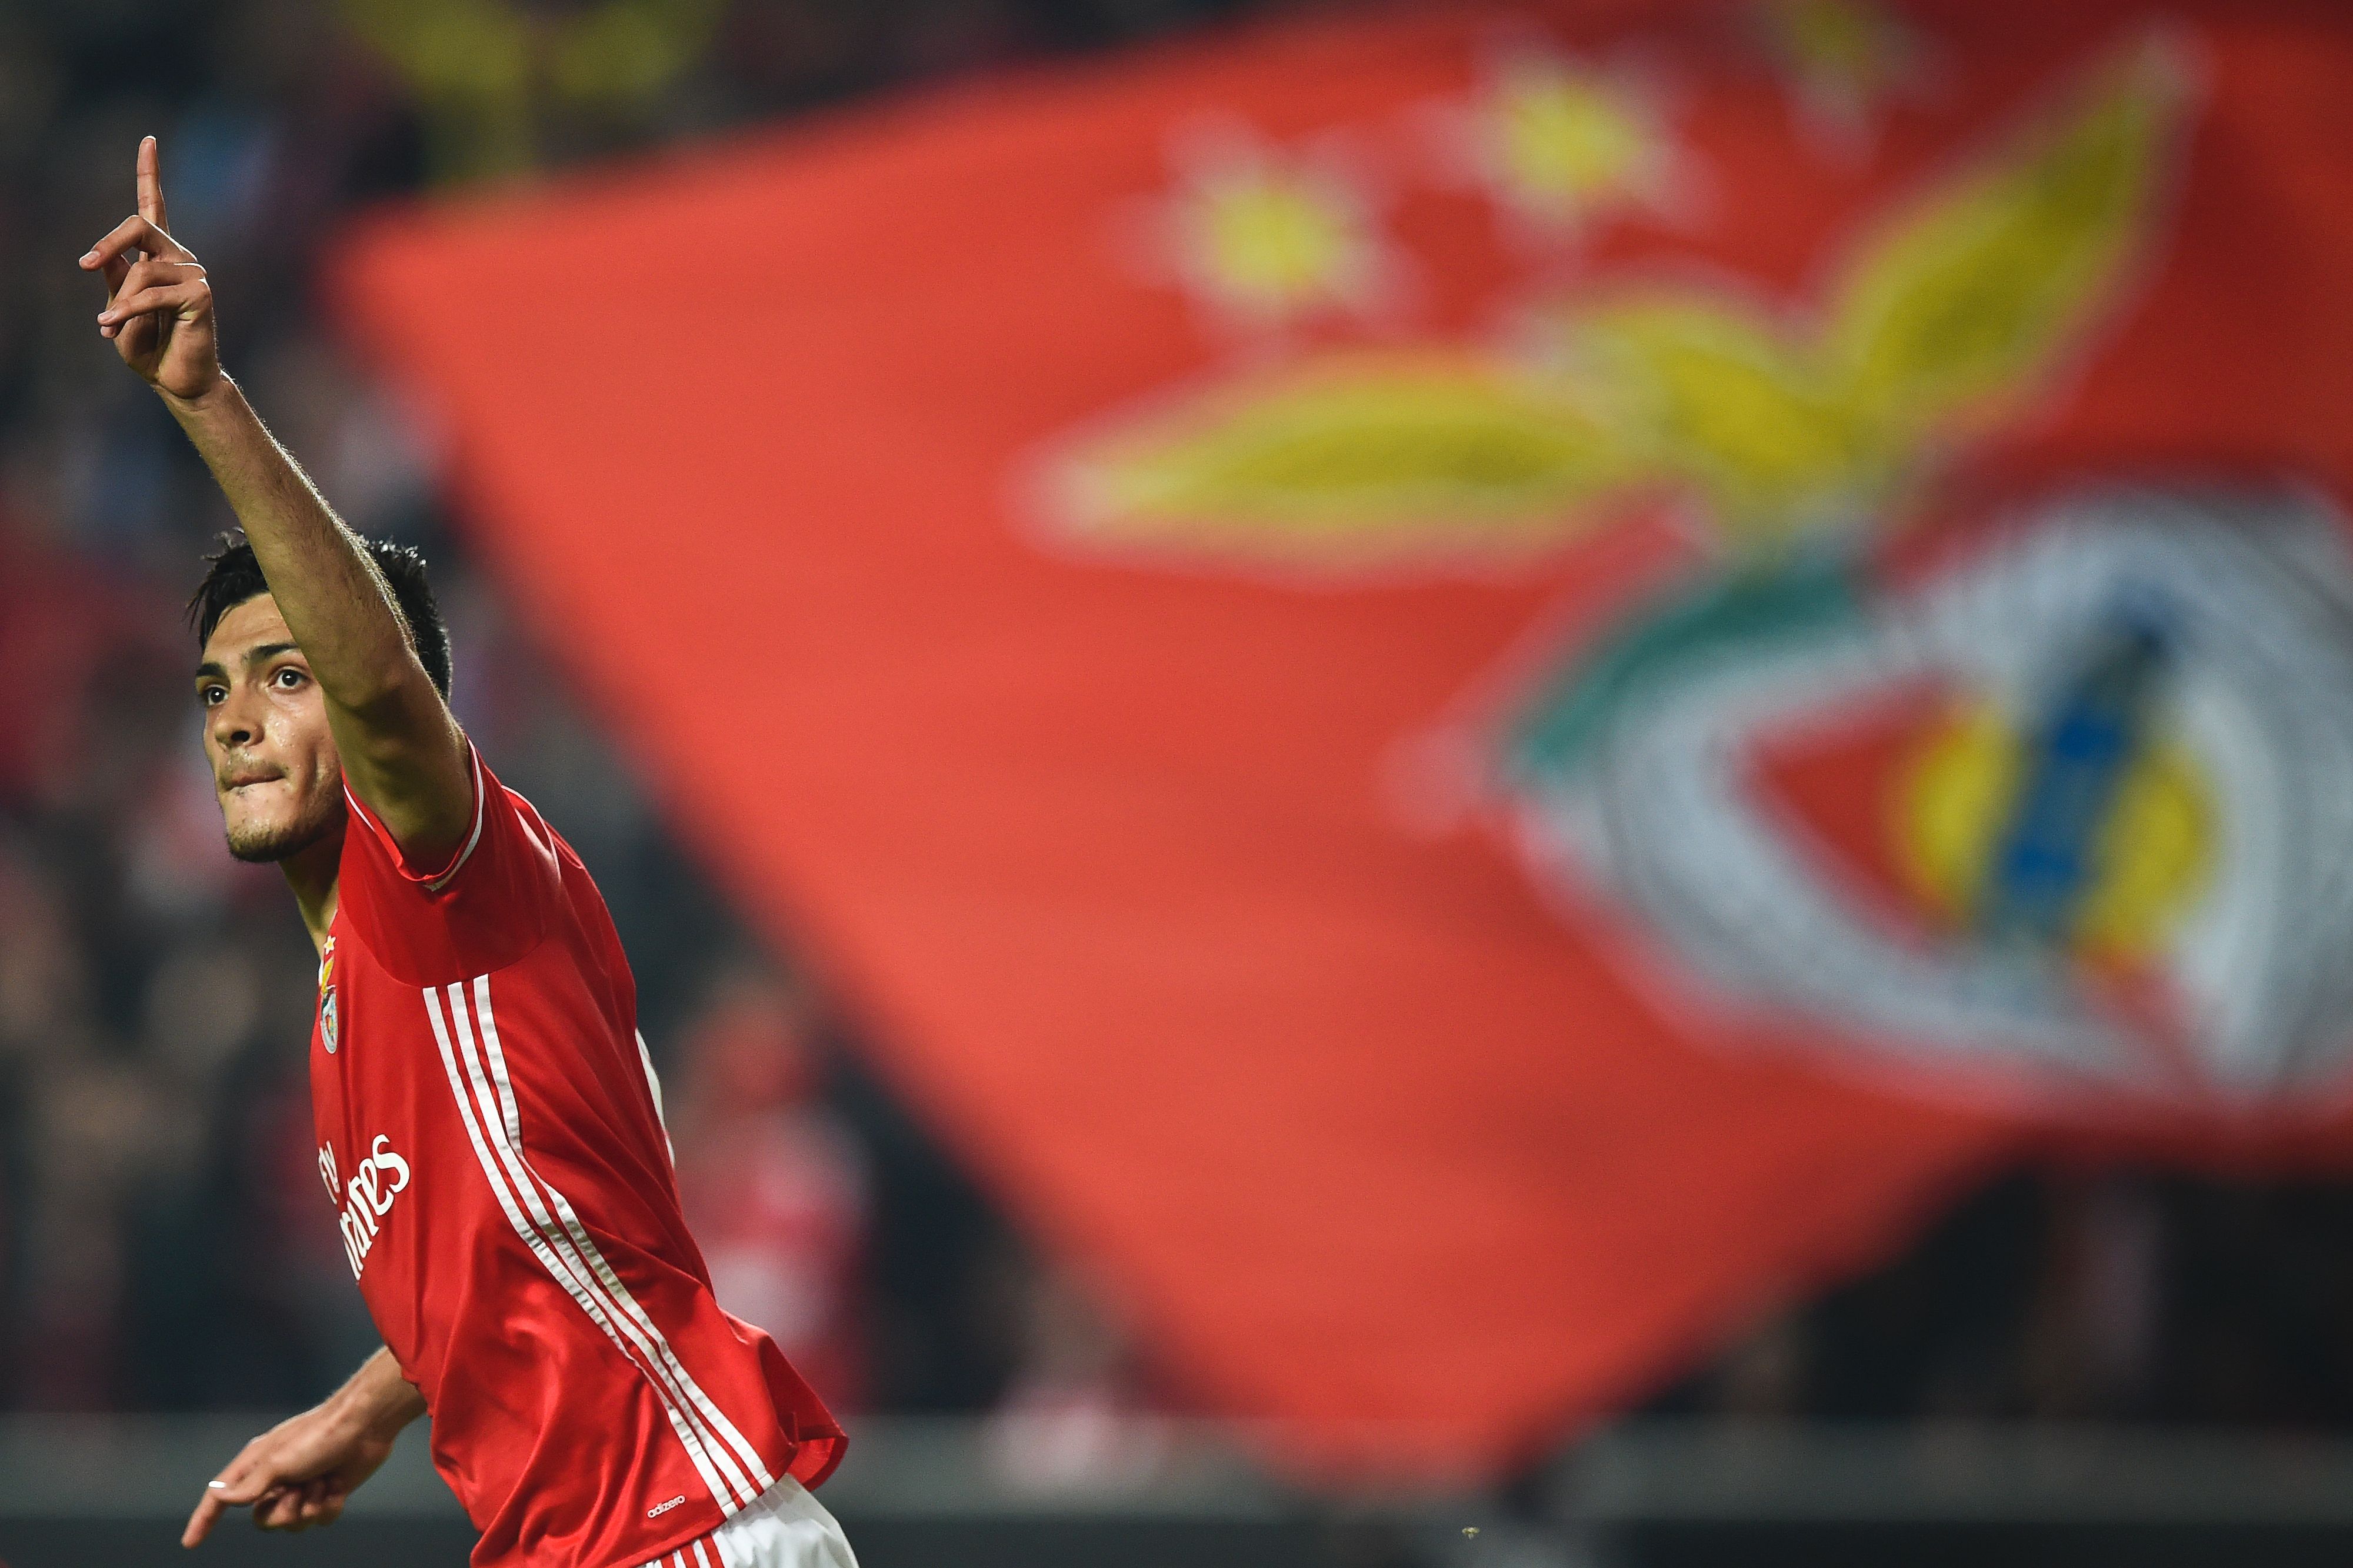 Benfica's Mexican forward Raul Jimenez celebrates after scoring during the UEFA Champions League Group B football match SL Benfica vs SSC Napoli at the Luz stadium in Lisbon, on December 6, 2016. / AFP / PATRICIA DE MELO MOREIRA        (Photo credit should read PATRICIA DE MELO MOREIRA/AFP/Getty Images)